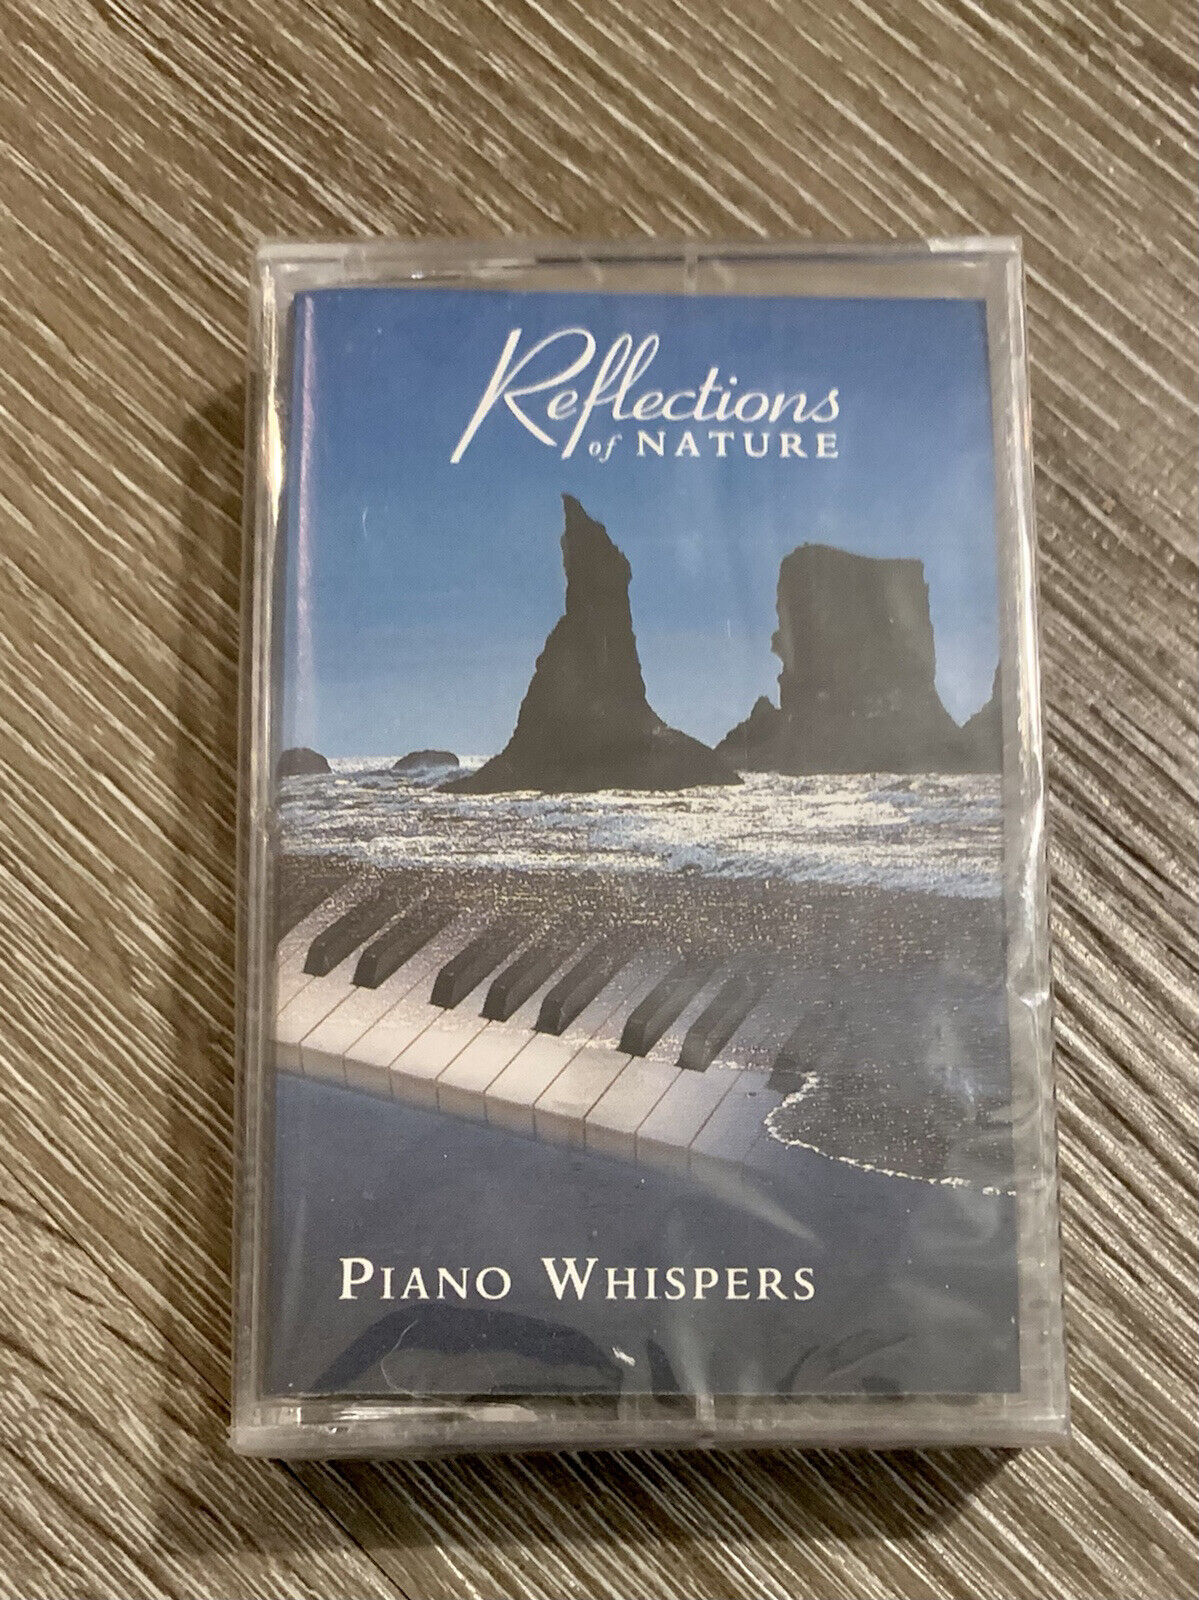 Vintage Reflections of Nature Cassette 1996 Piano Whispers Tomas Walker New